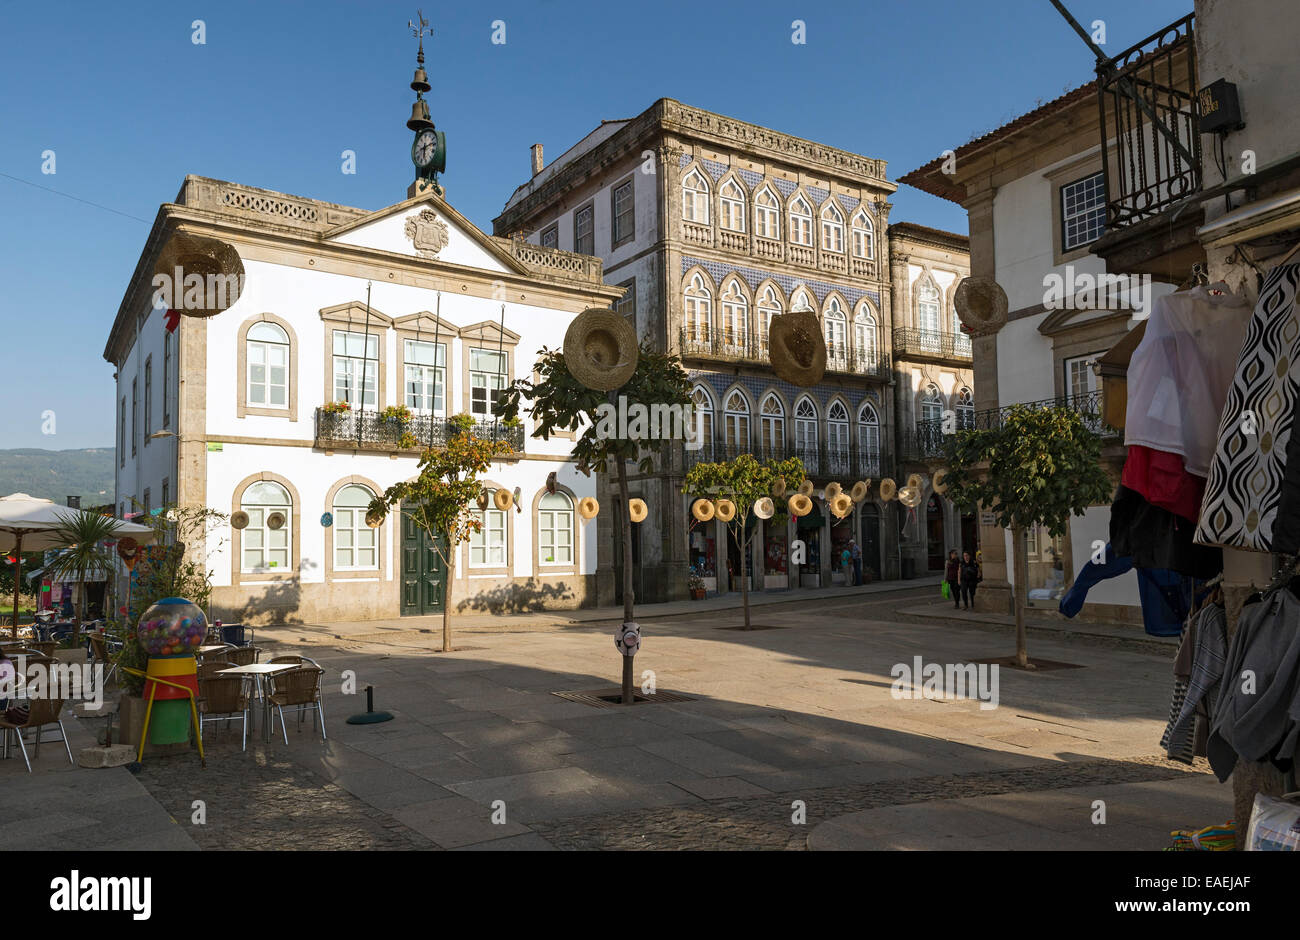 VALENÇA, PORTUGAL - SEPTEMBER 2, 2014: Shopping area in downtown. Portuguese Valença is a border town with Spain and specialized Stock Photo